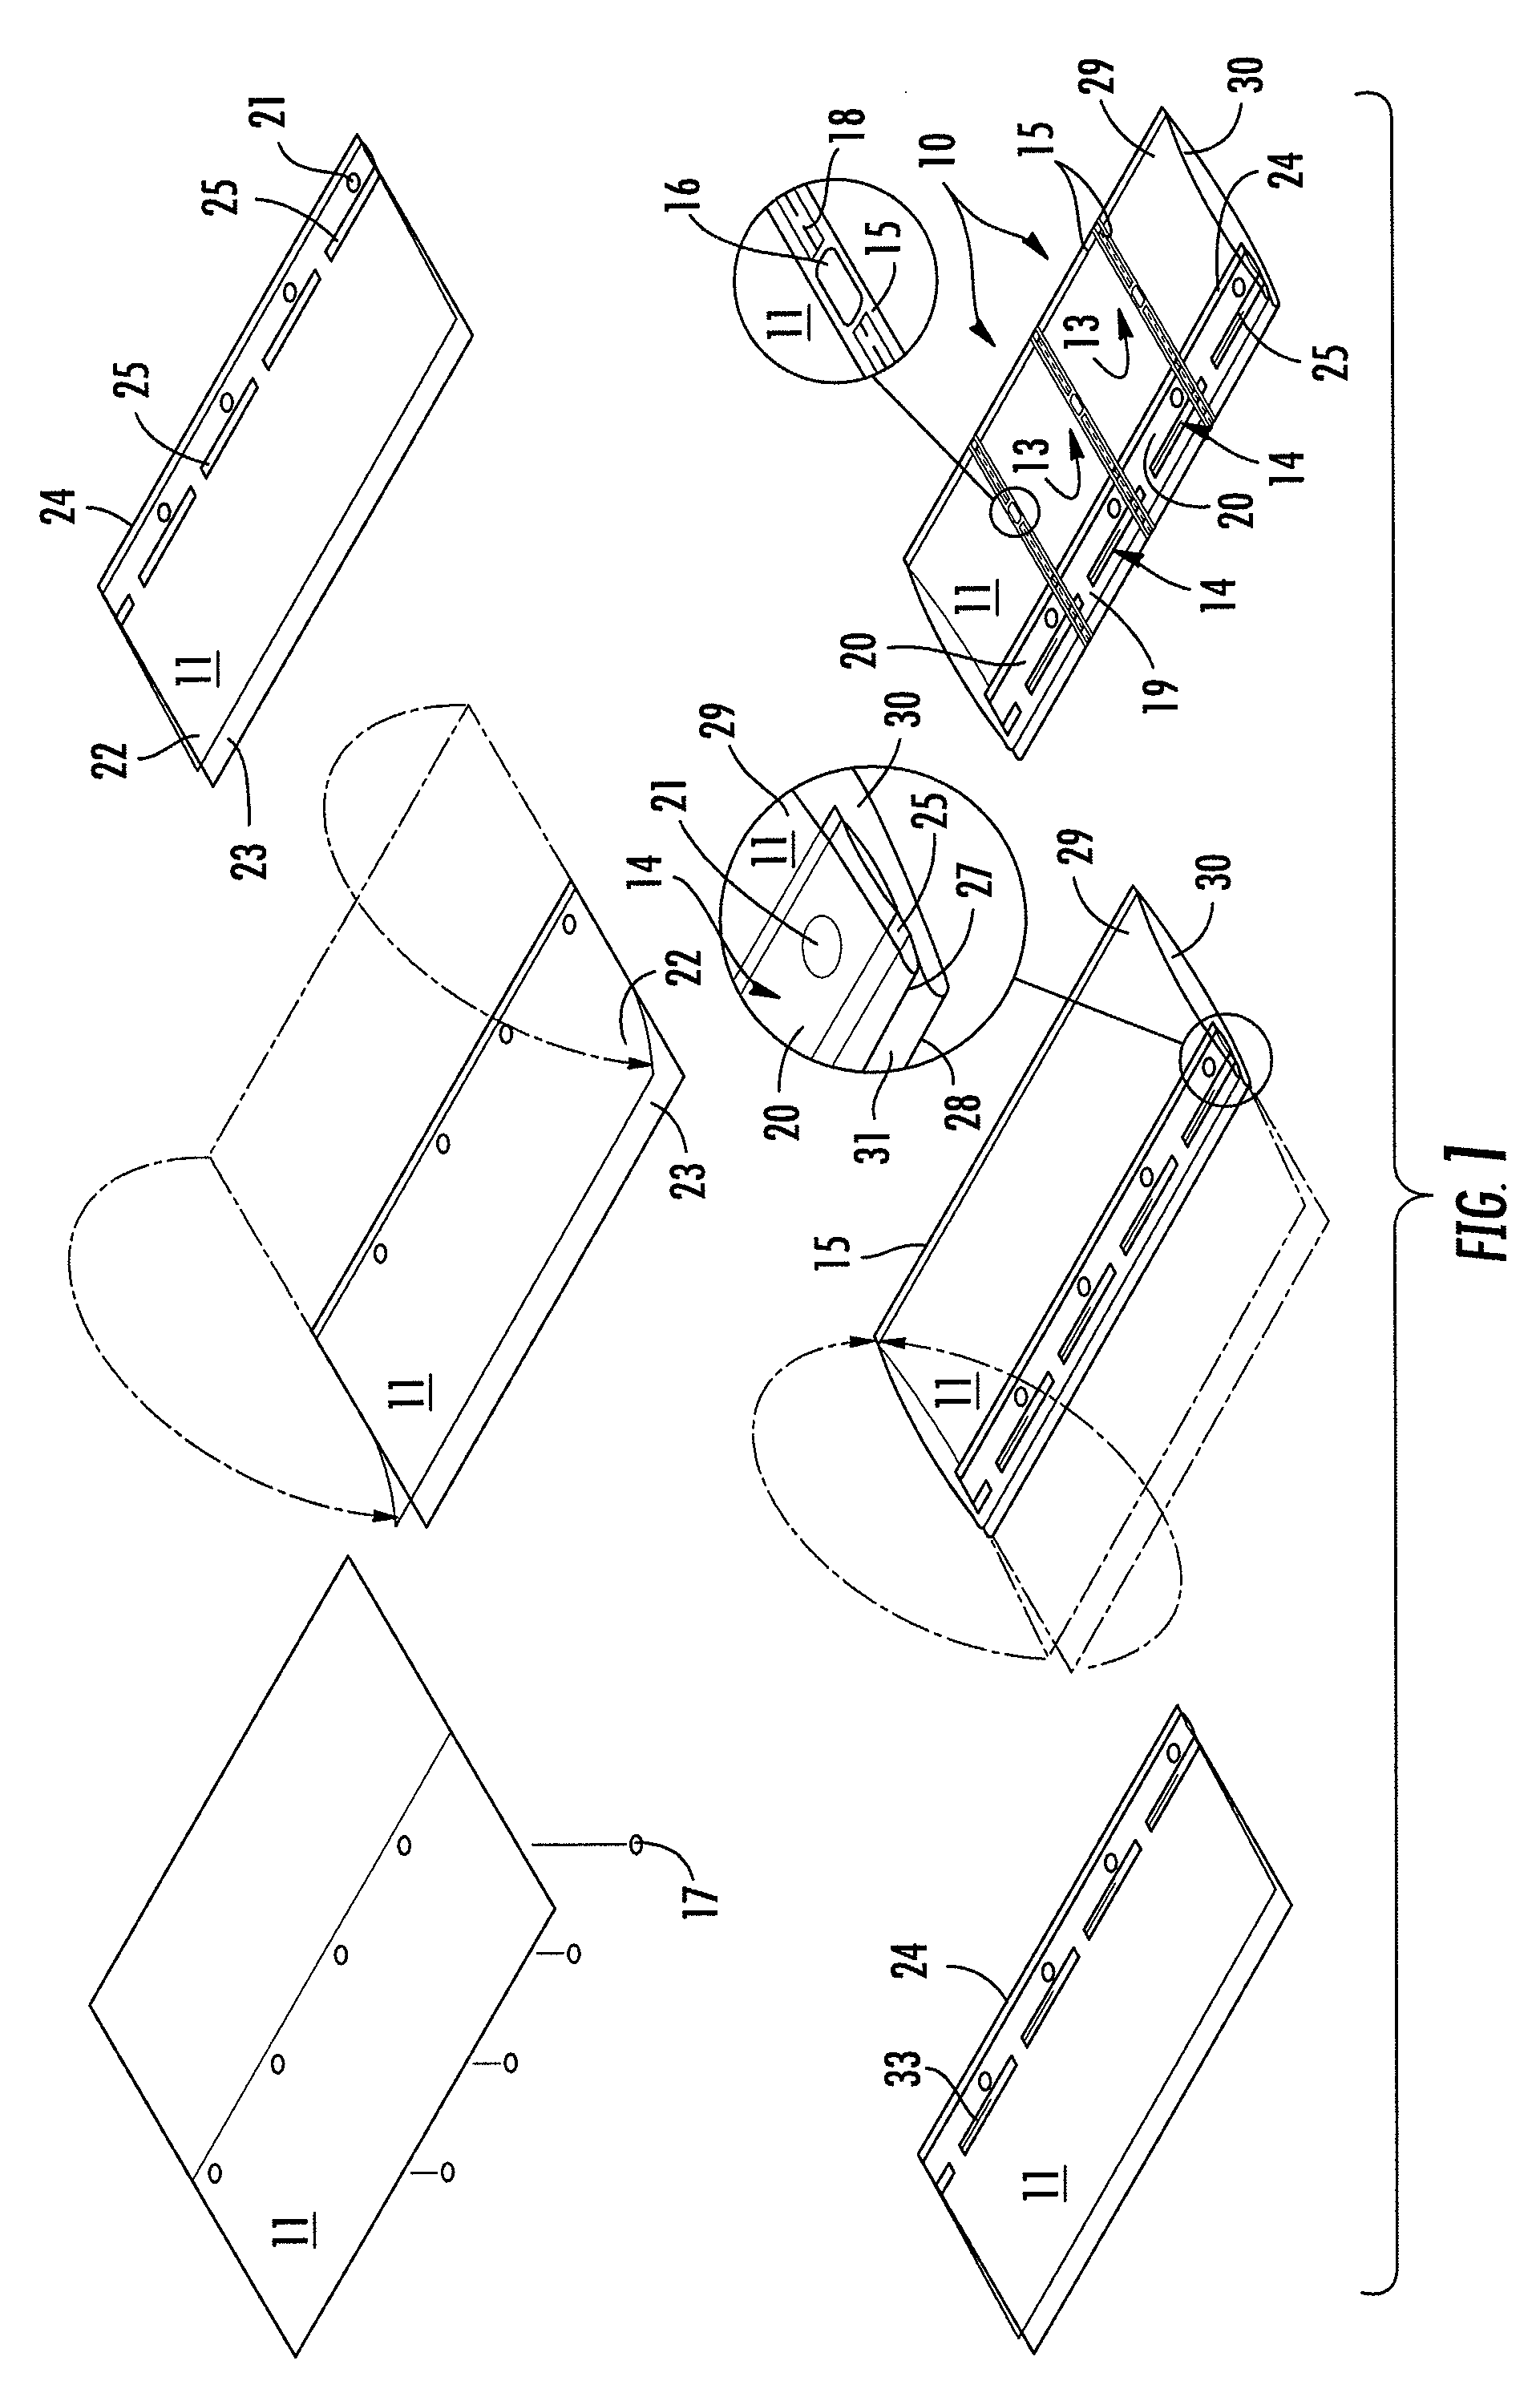 Inflatable structure for packaging and associated apparatus and method